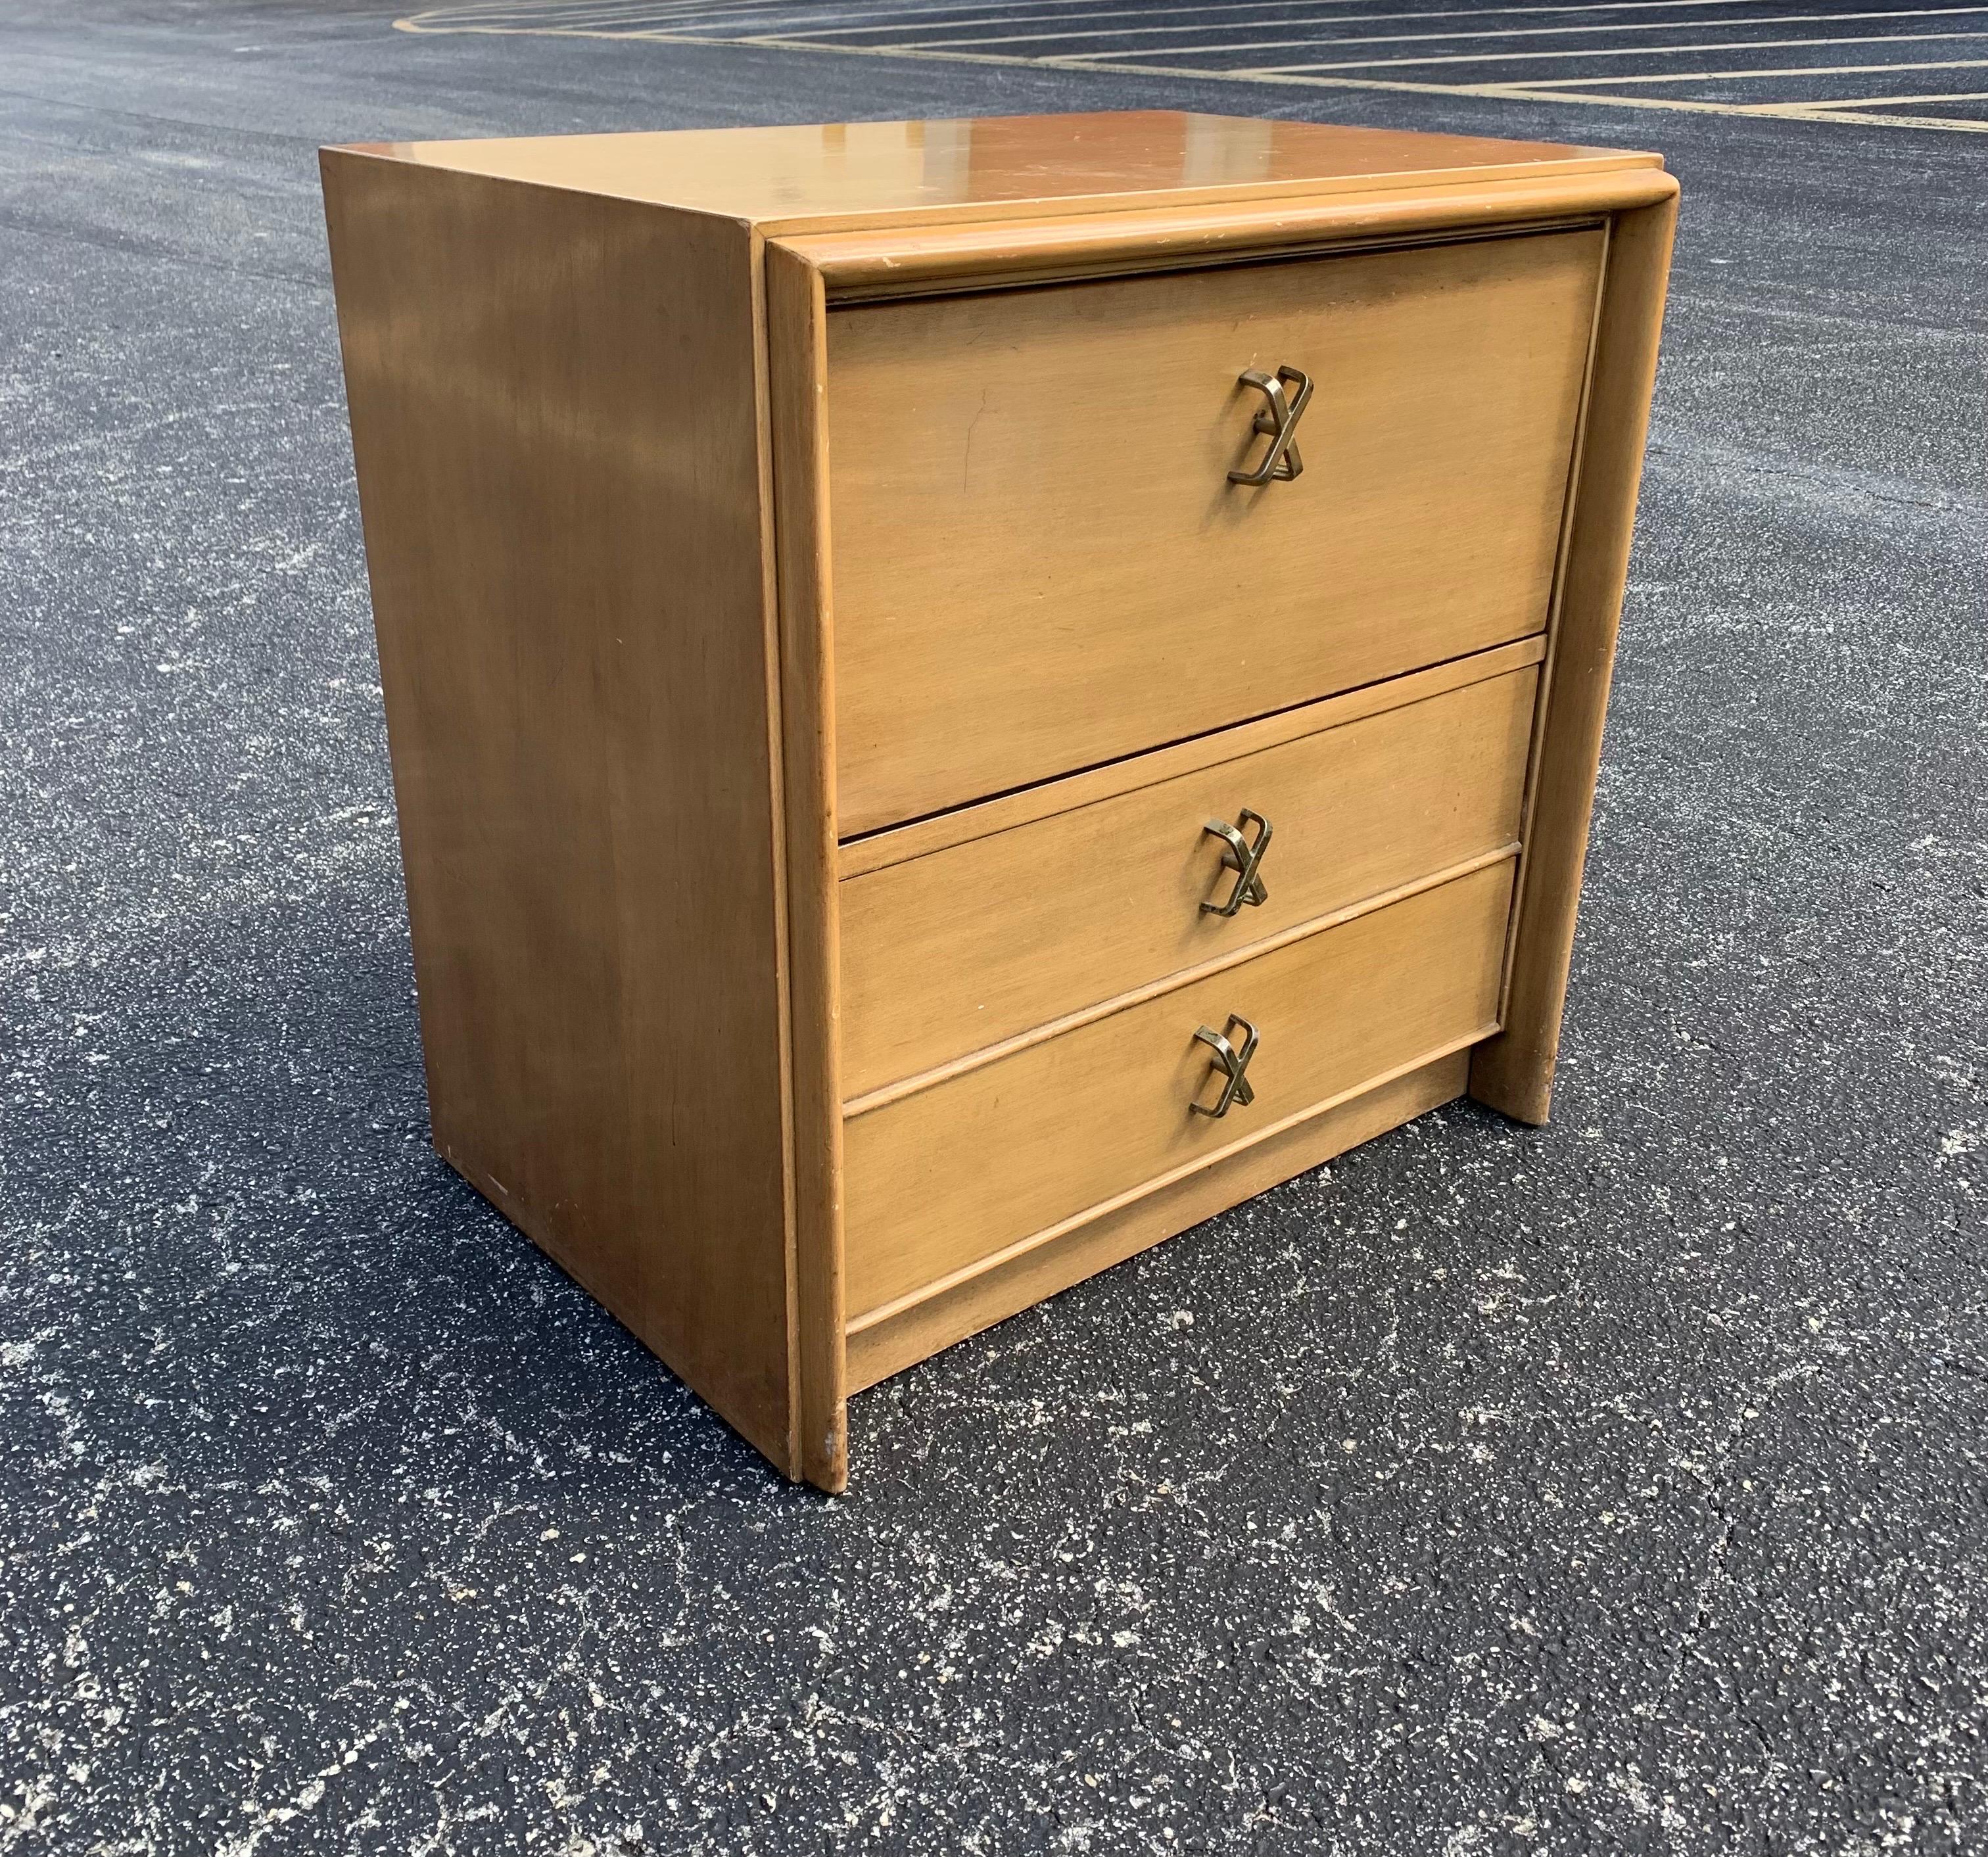 This Paul Frankl nightstand is a true vintage gem, embodying mid-century modern style with its sleek lines and warm brown color. Crafted by Johnson Furniture in America, this original piece is perfect for adding a touch of retro charm to any room.